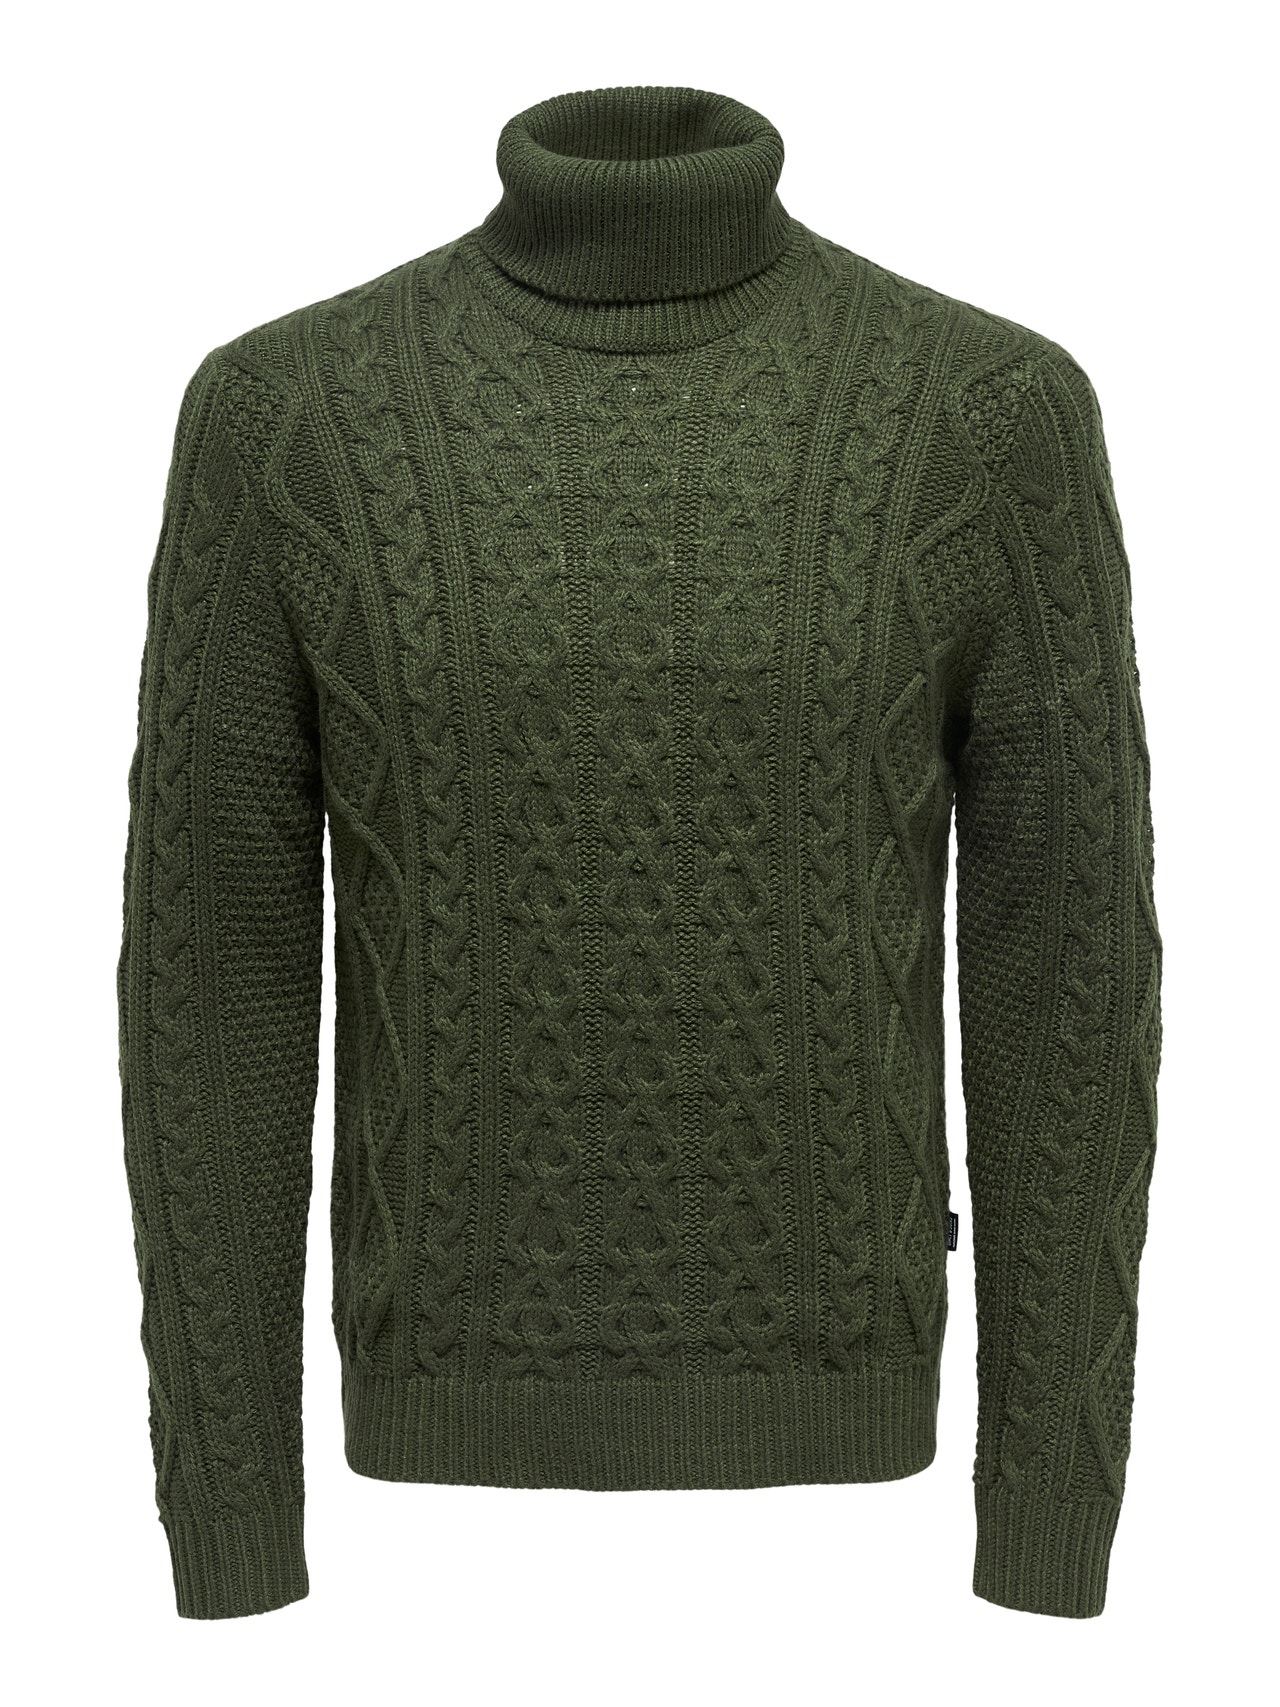 ONLY & SONS Roll neck knitted pullover -Rifle Green - 22023164